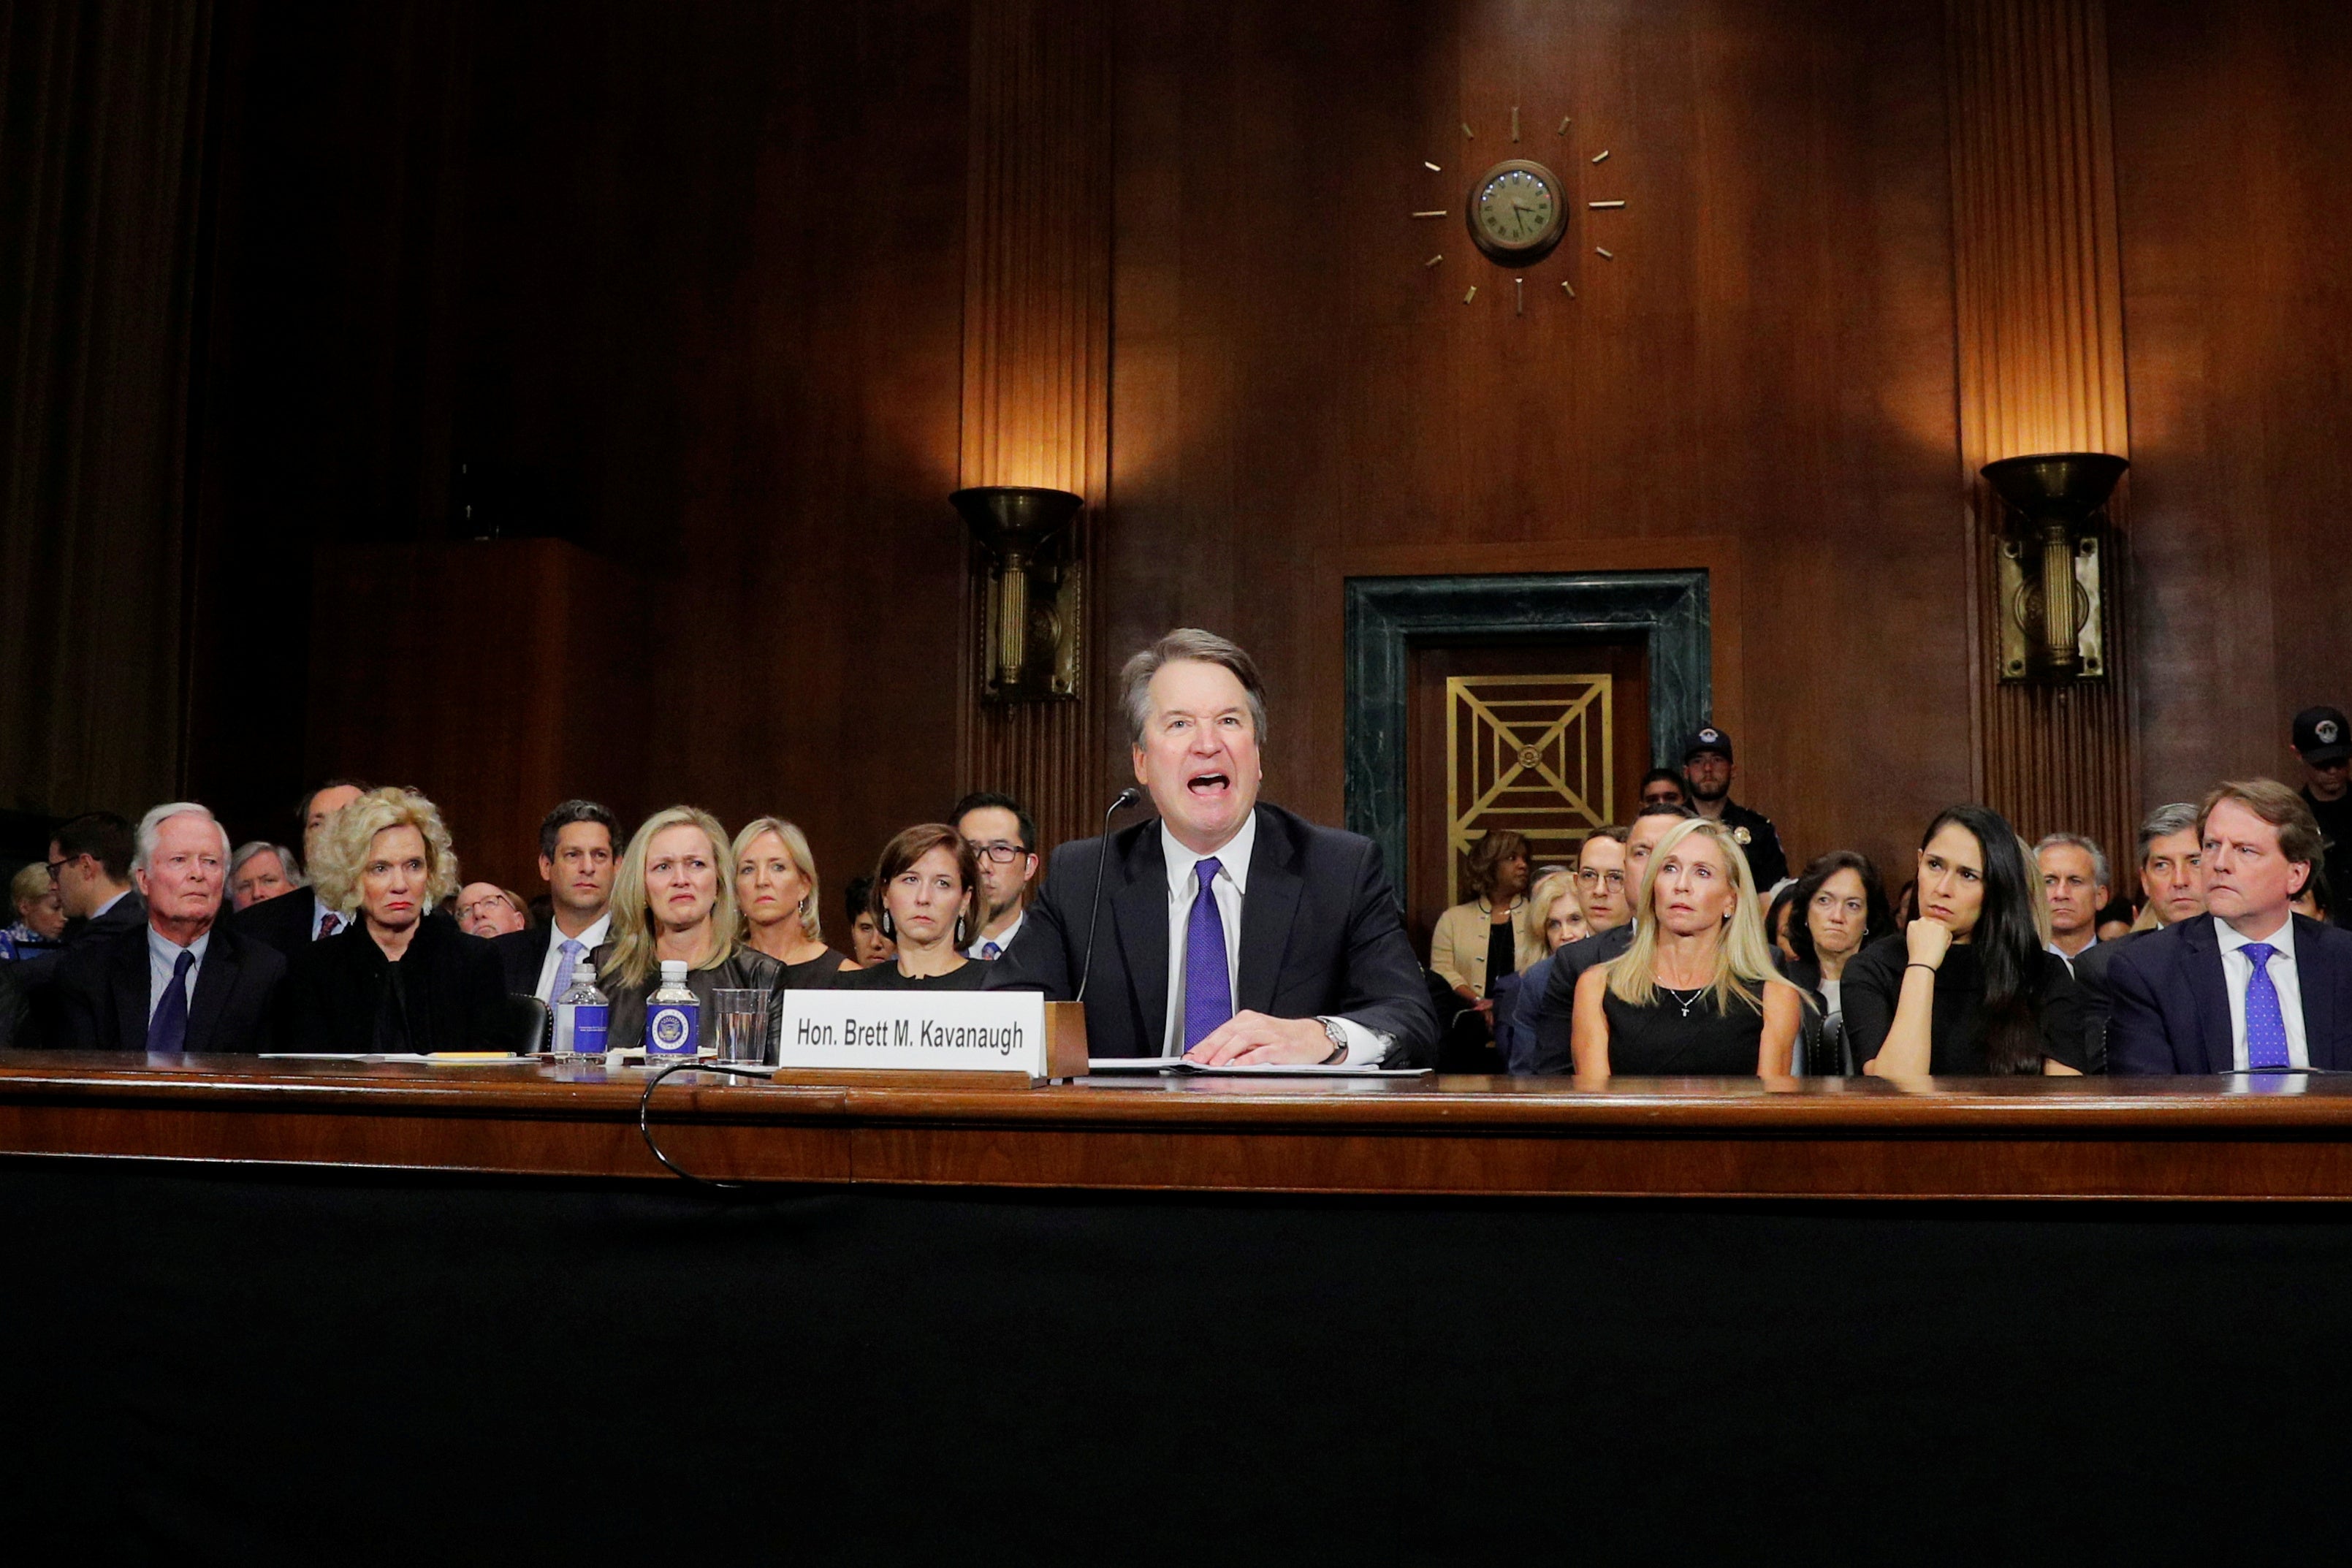 Kavanaugh yelling. Behind him, women seated in the front row look disgusted.